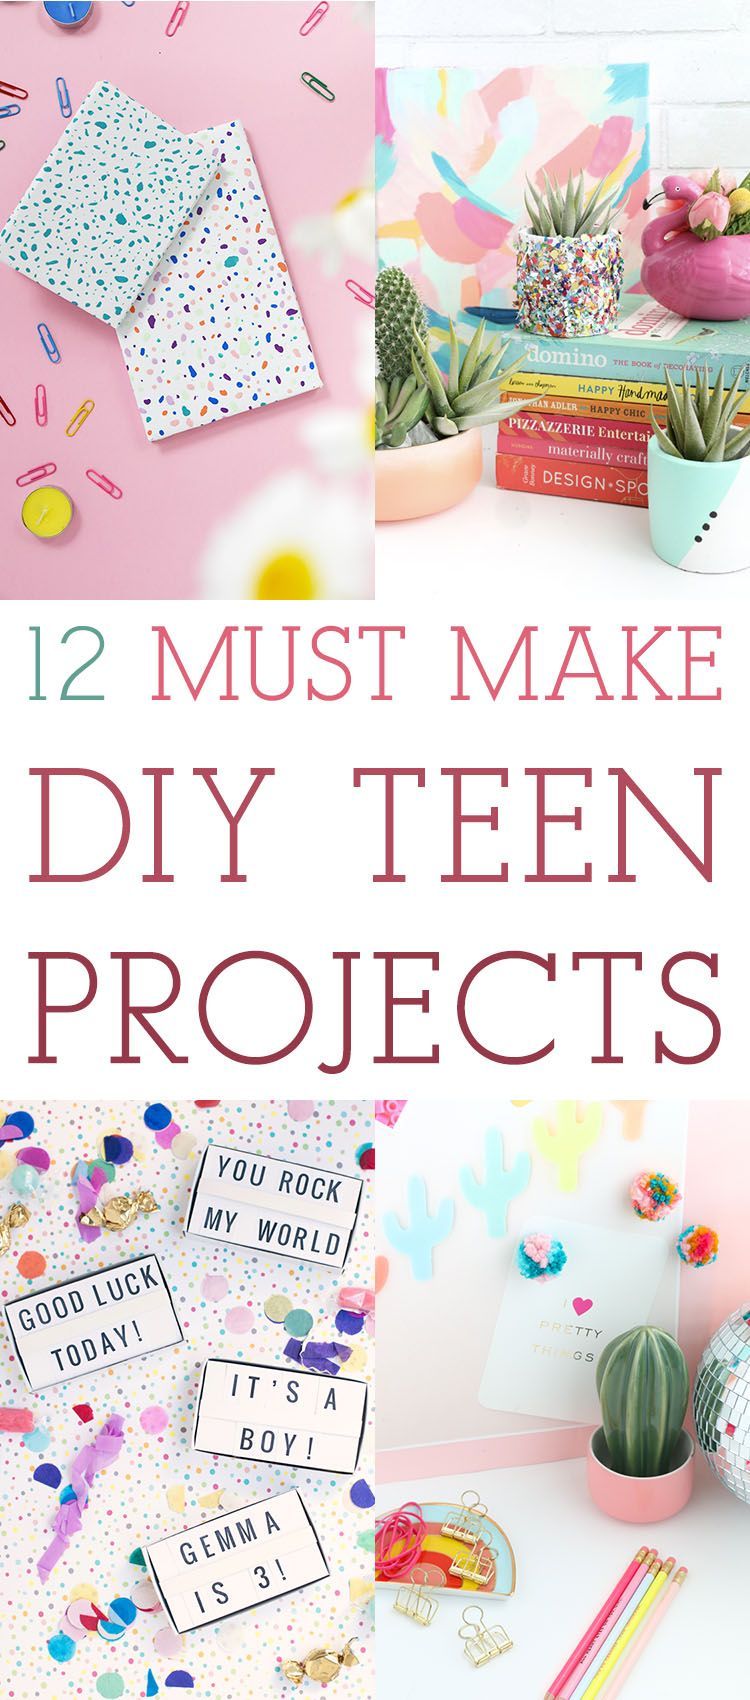 12 Must Make DIY Teen Projects! // Great for Gifts - The Cottage Market - 12 Must Make DIY Teen Projects! // Great for Gifts - The Cottage Market -   19 diy Projects for teen girls ideas